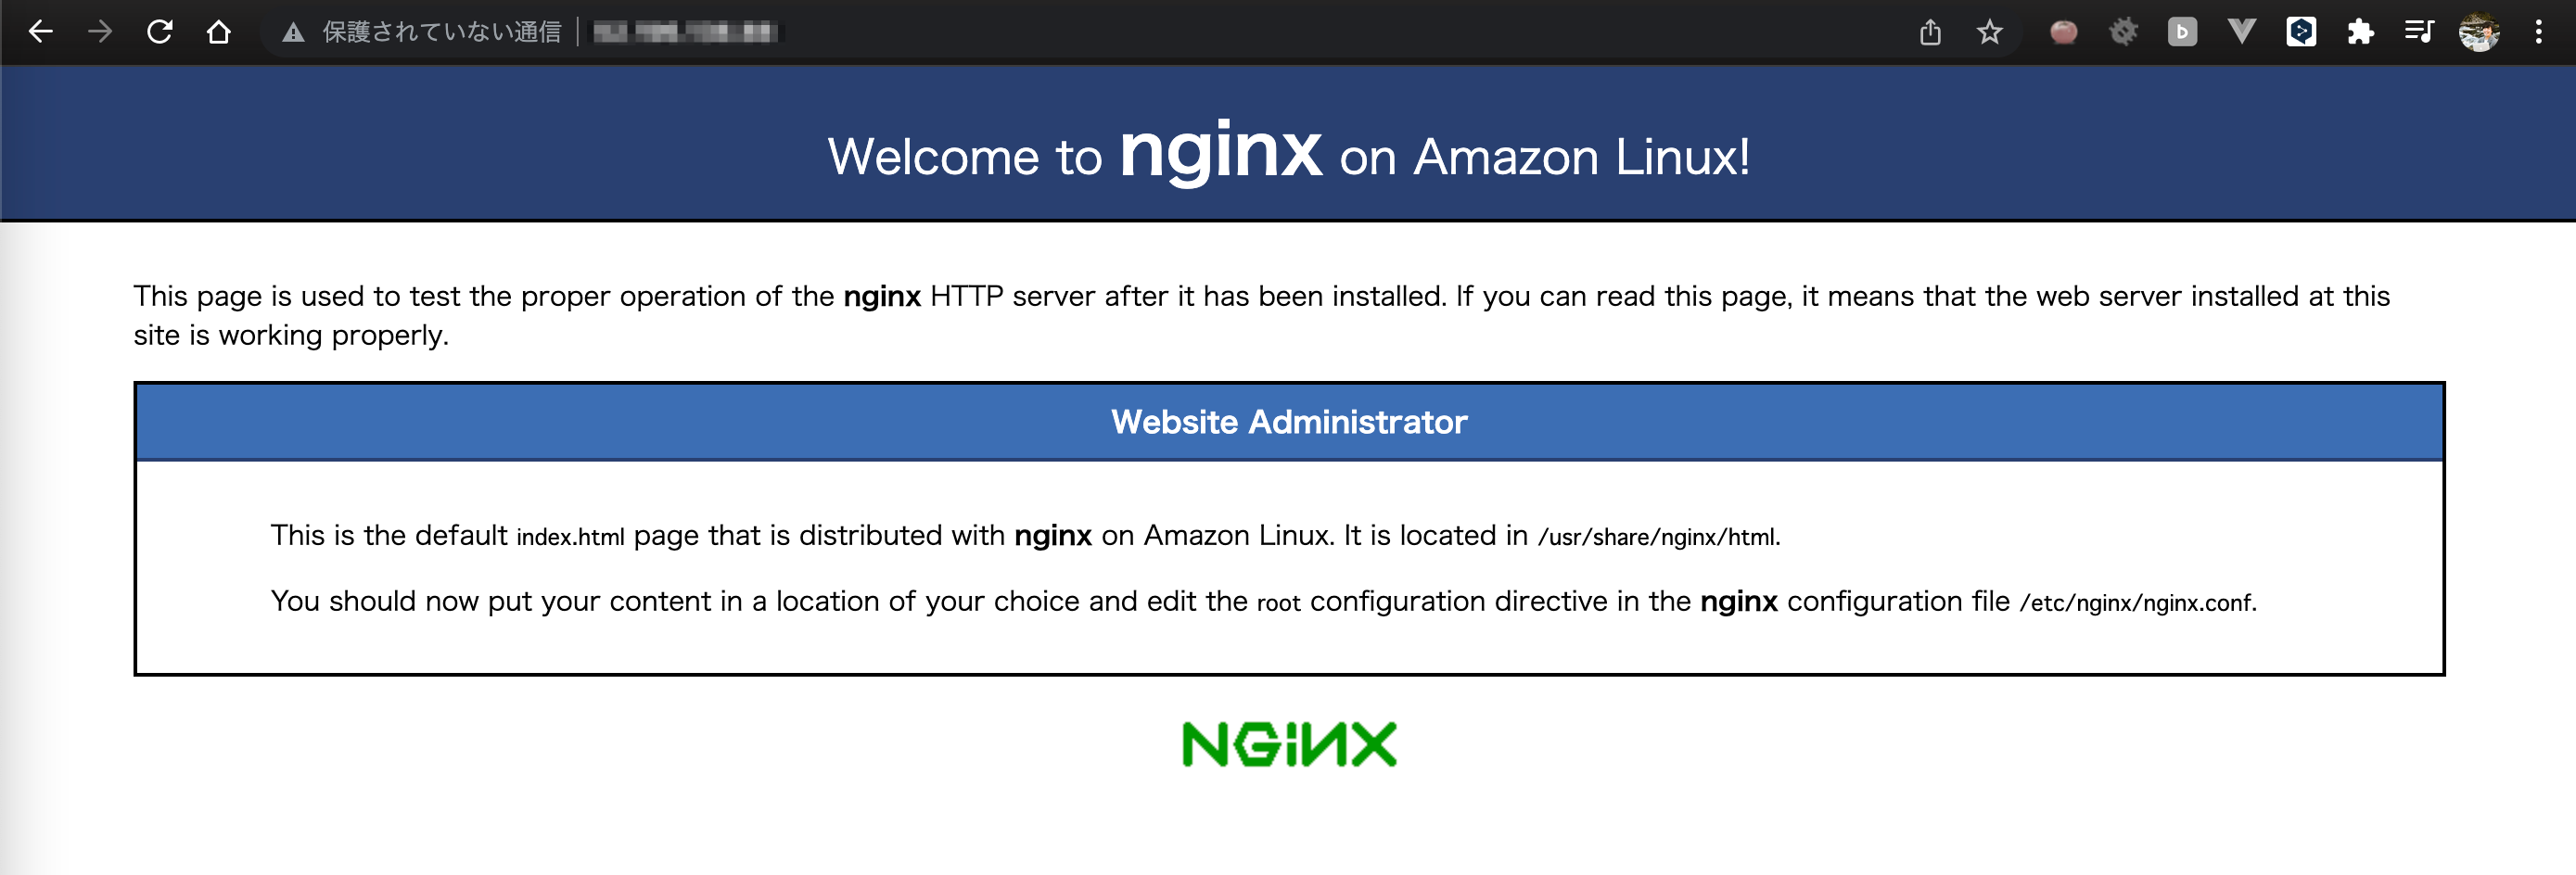 Test_Page_for_the_Nginx_HTTP_Server_on_Amazon_Linux.png